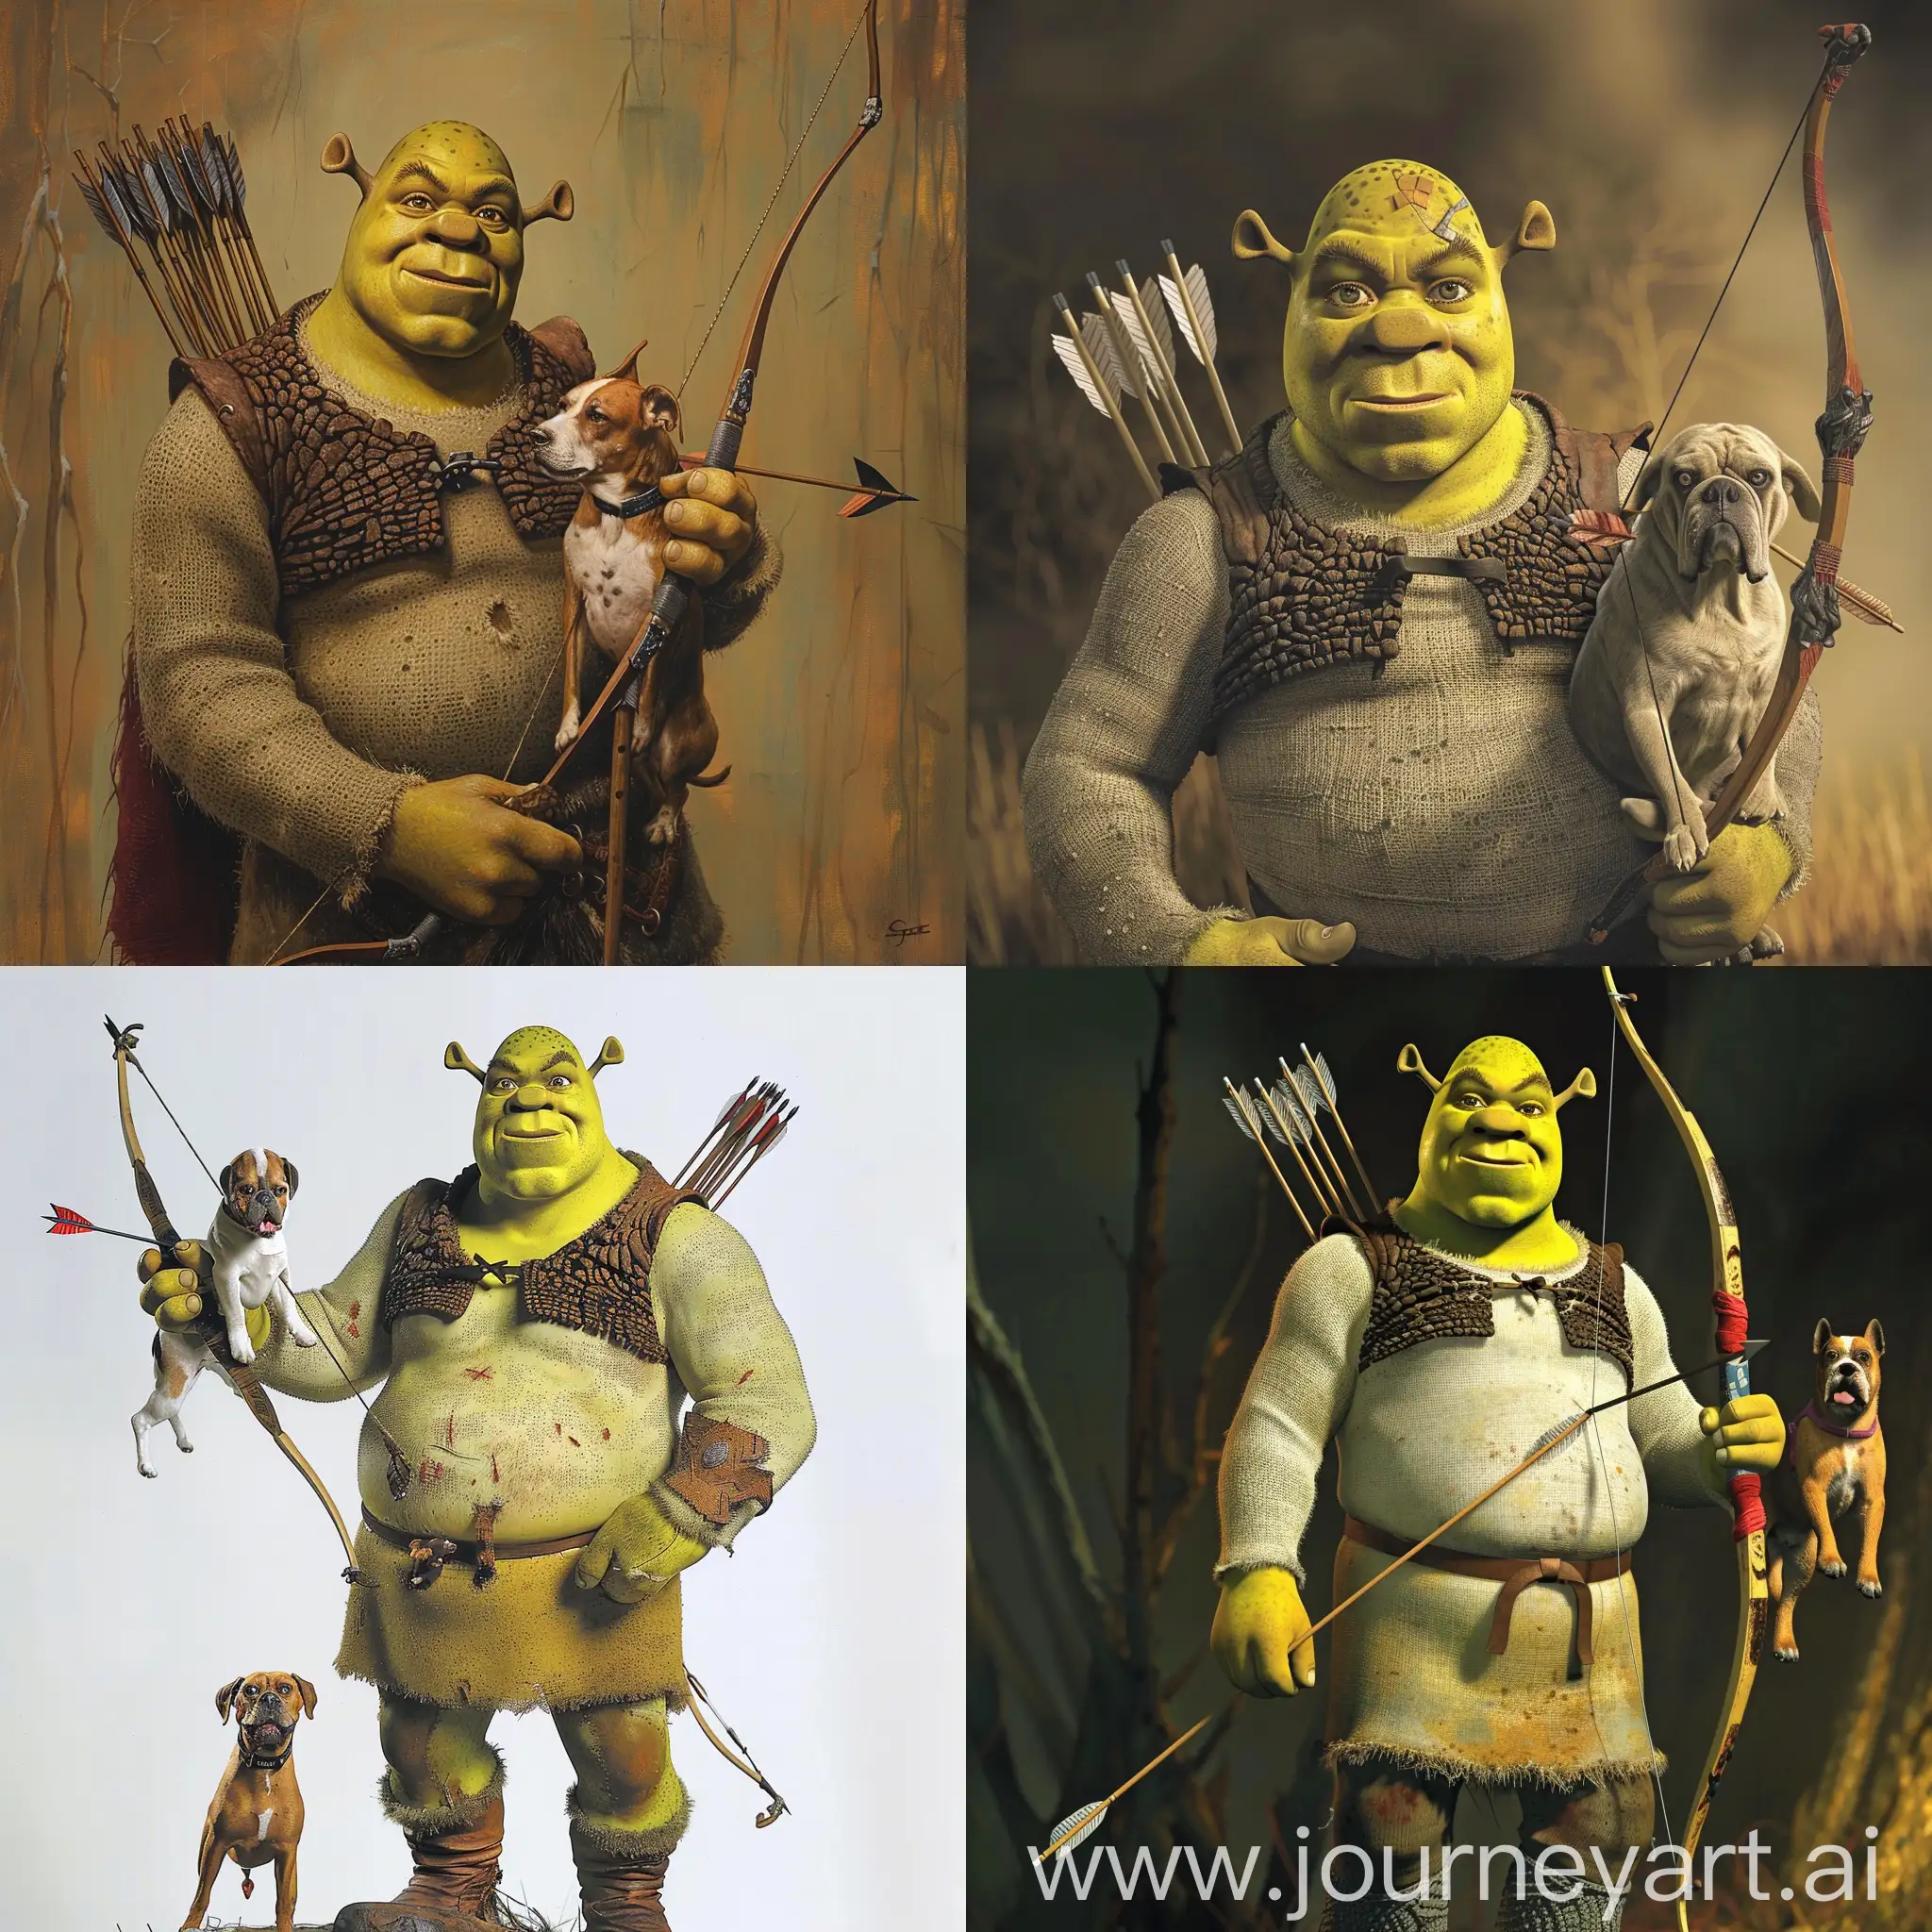 Shrek with arrows and dog in the hand